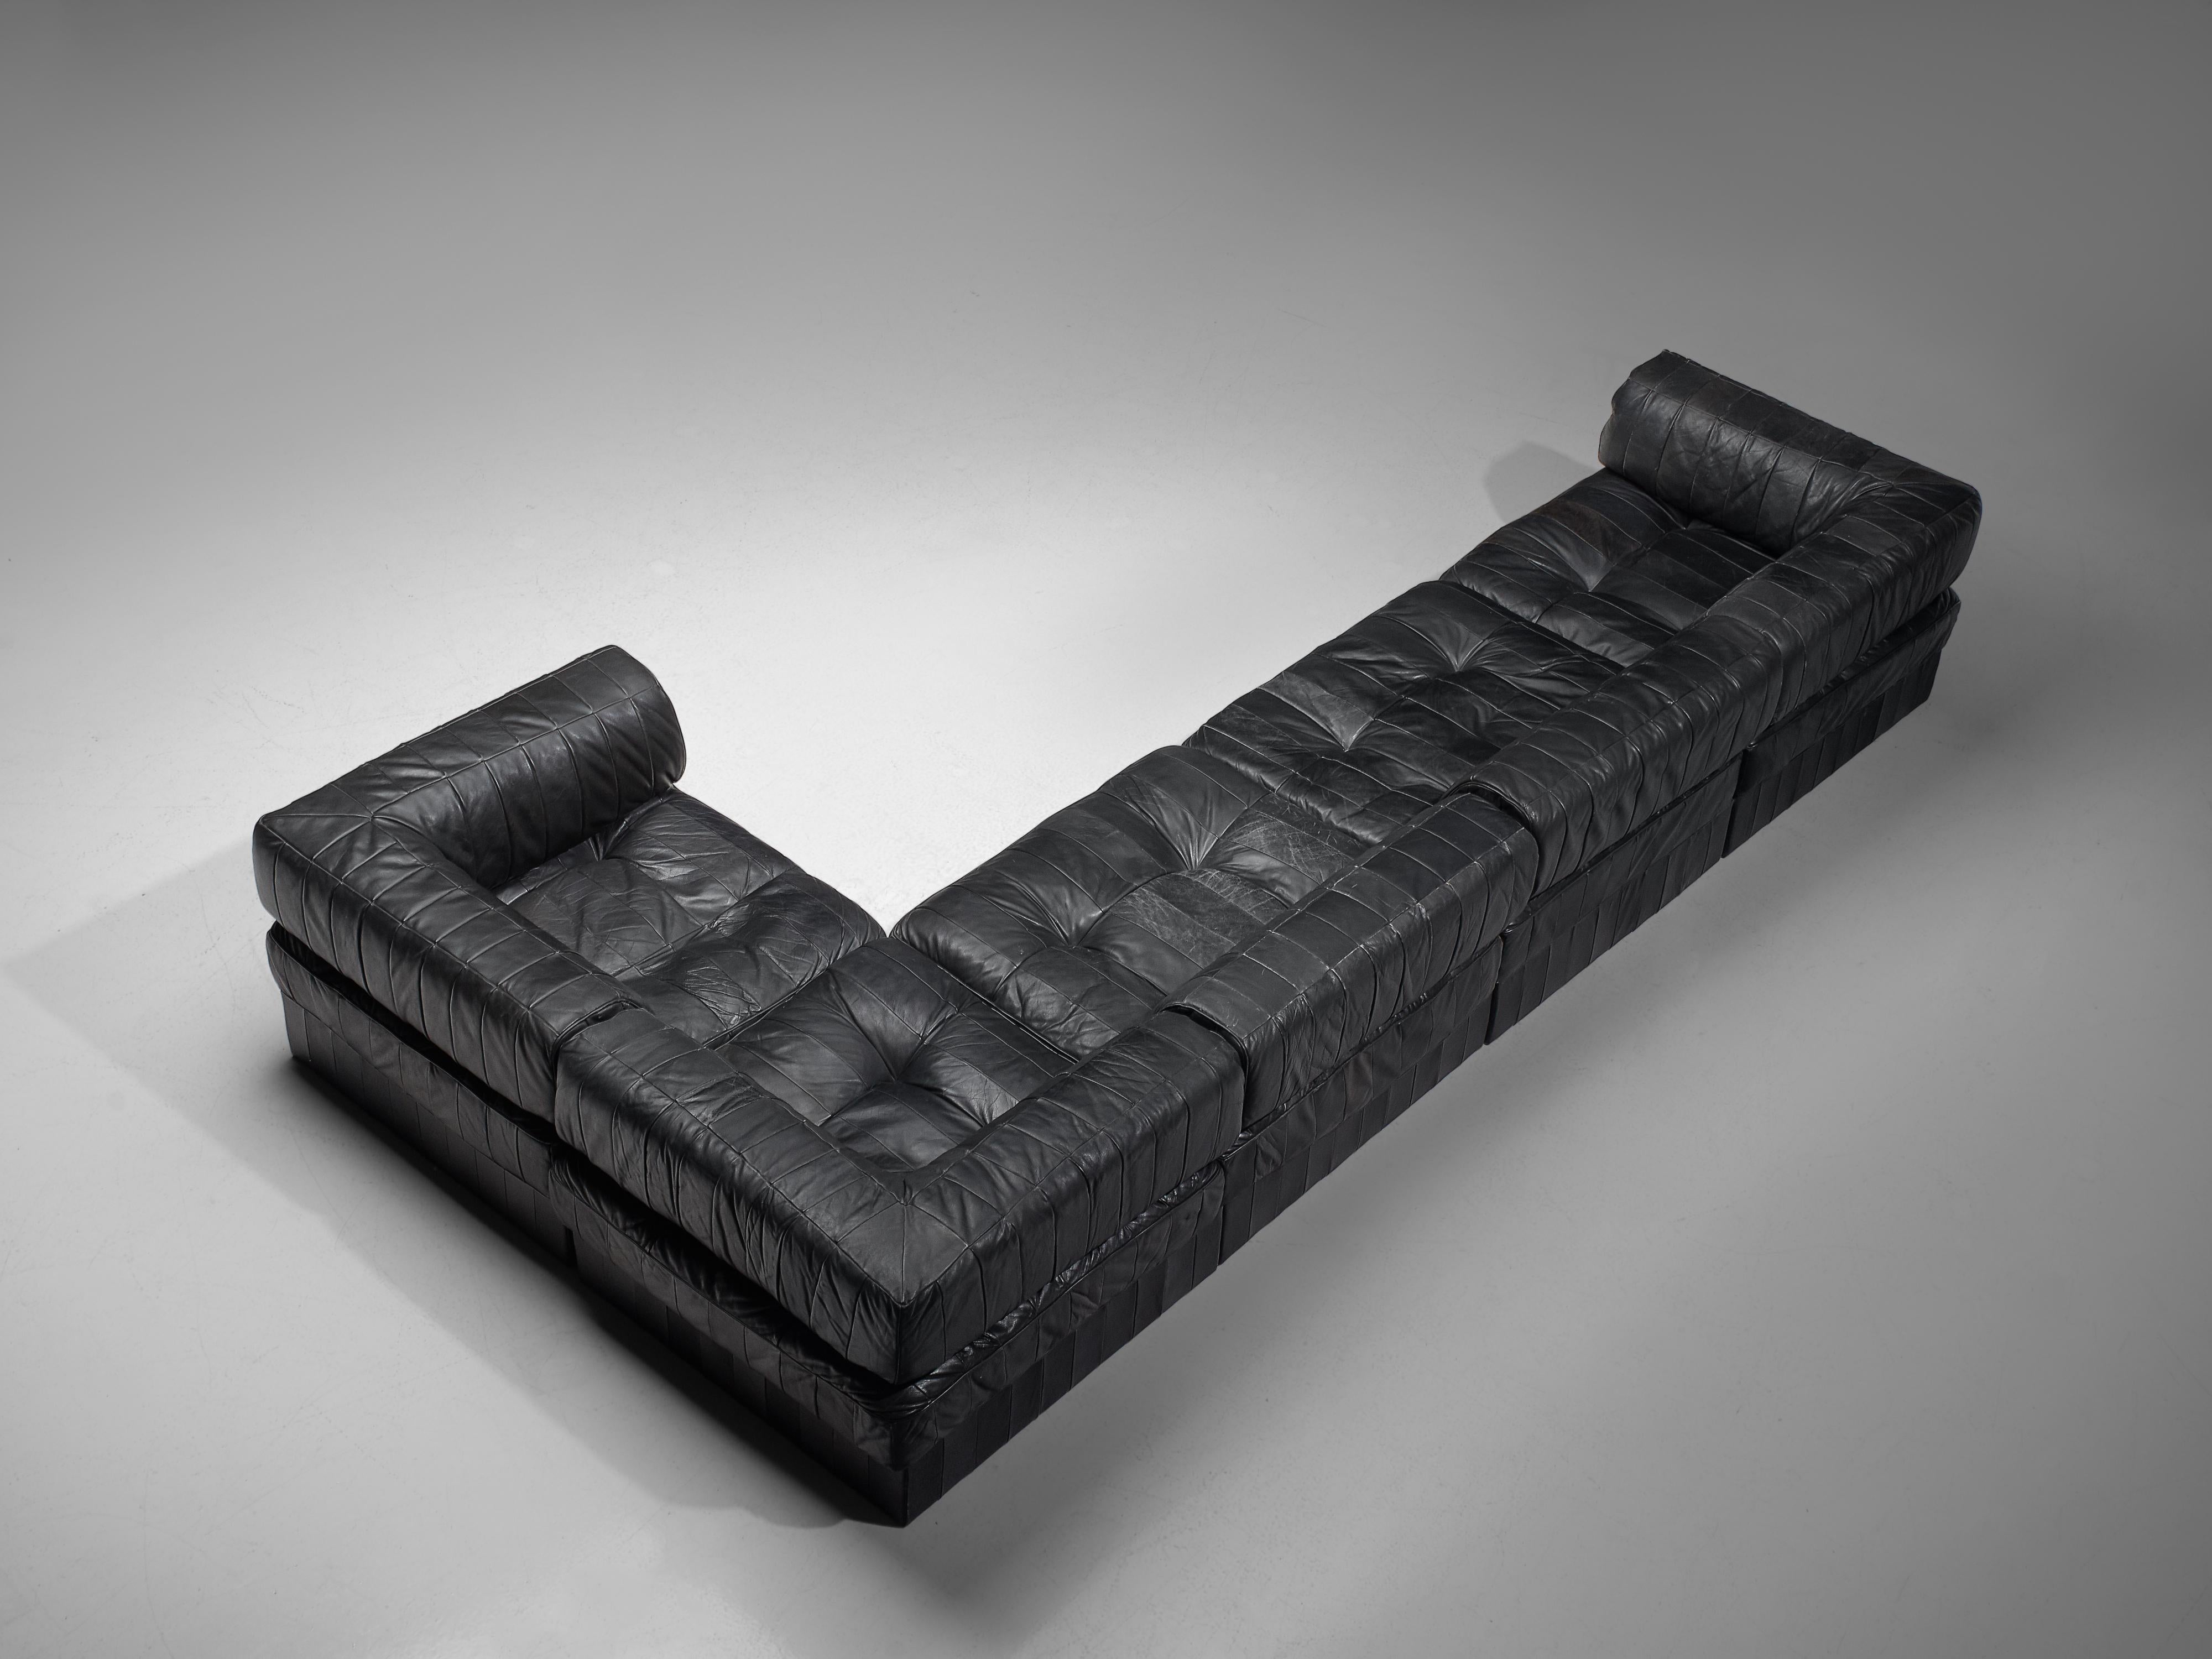 Swiss De Sede DS88 Modular Sofa in Black Patinated Leather